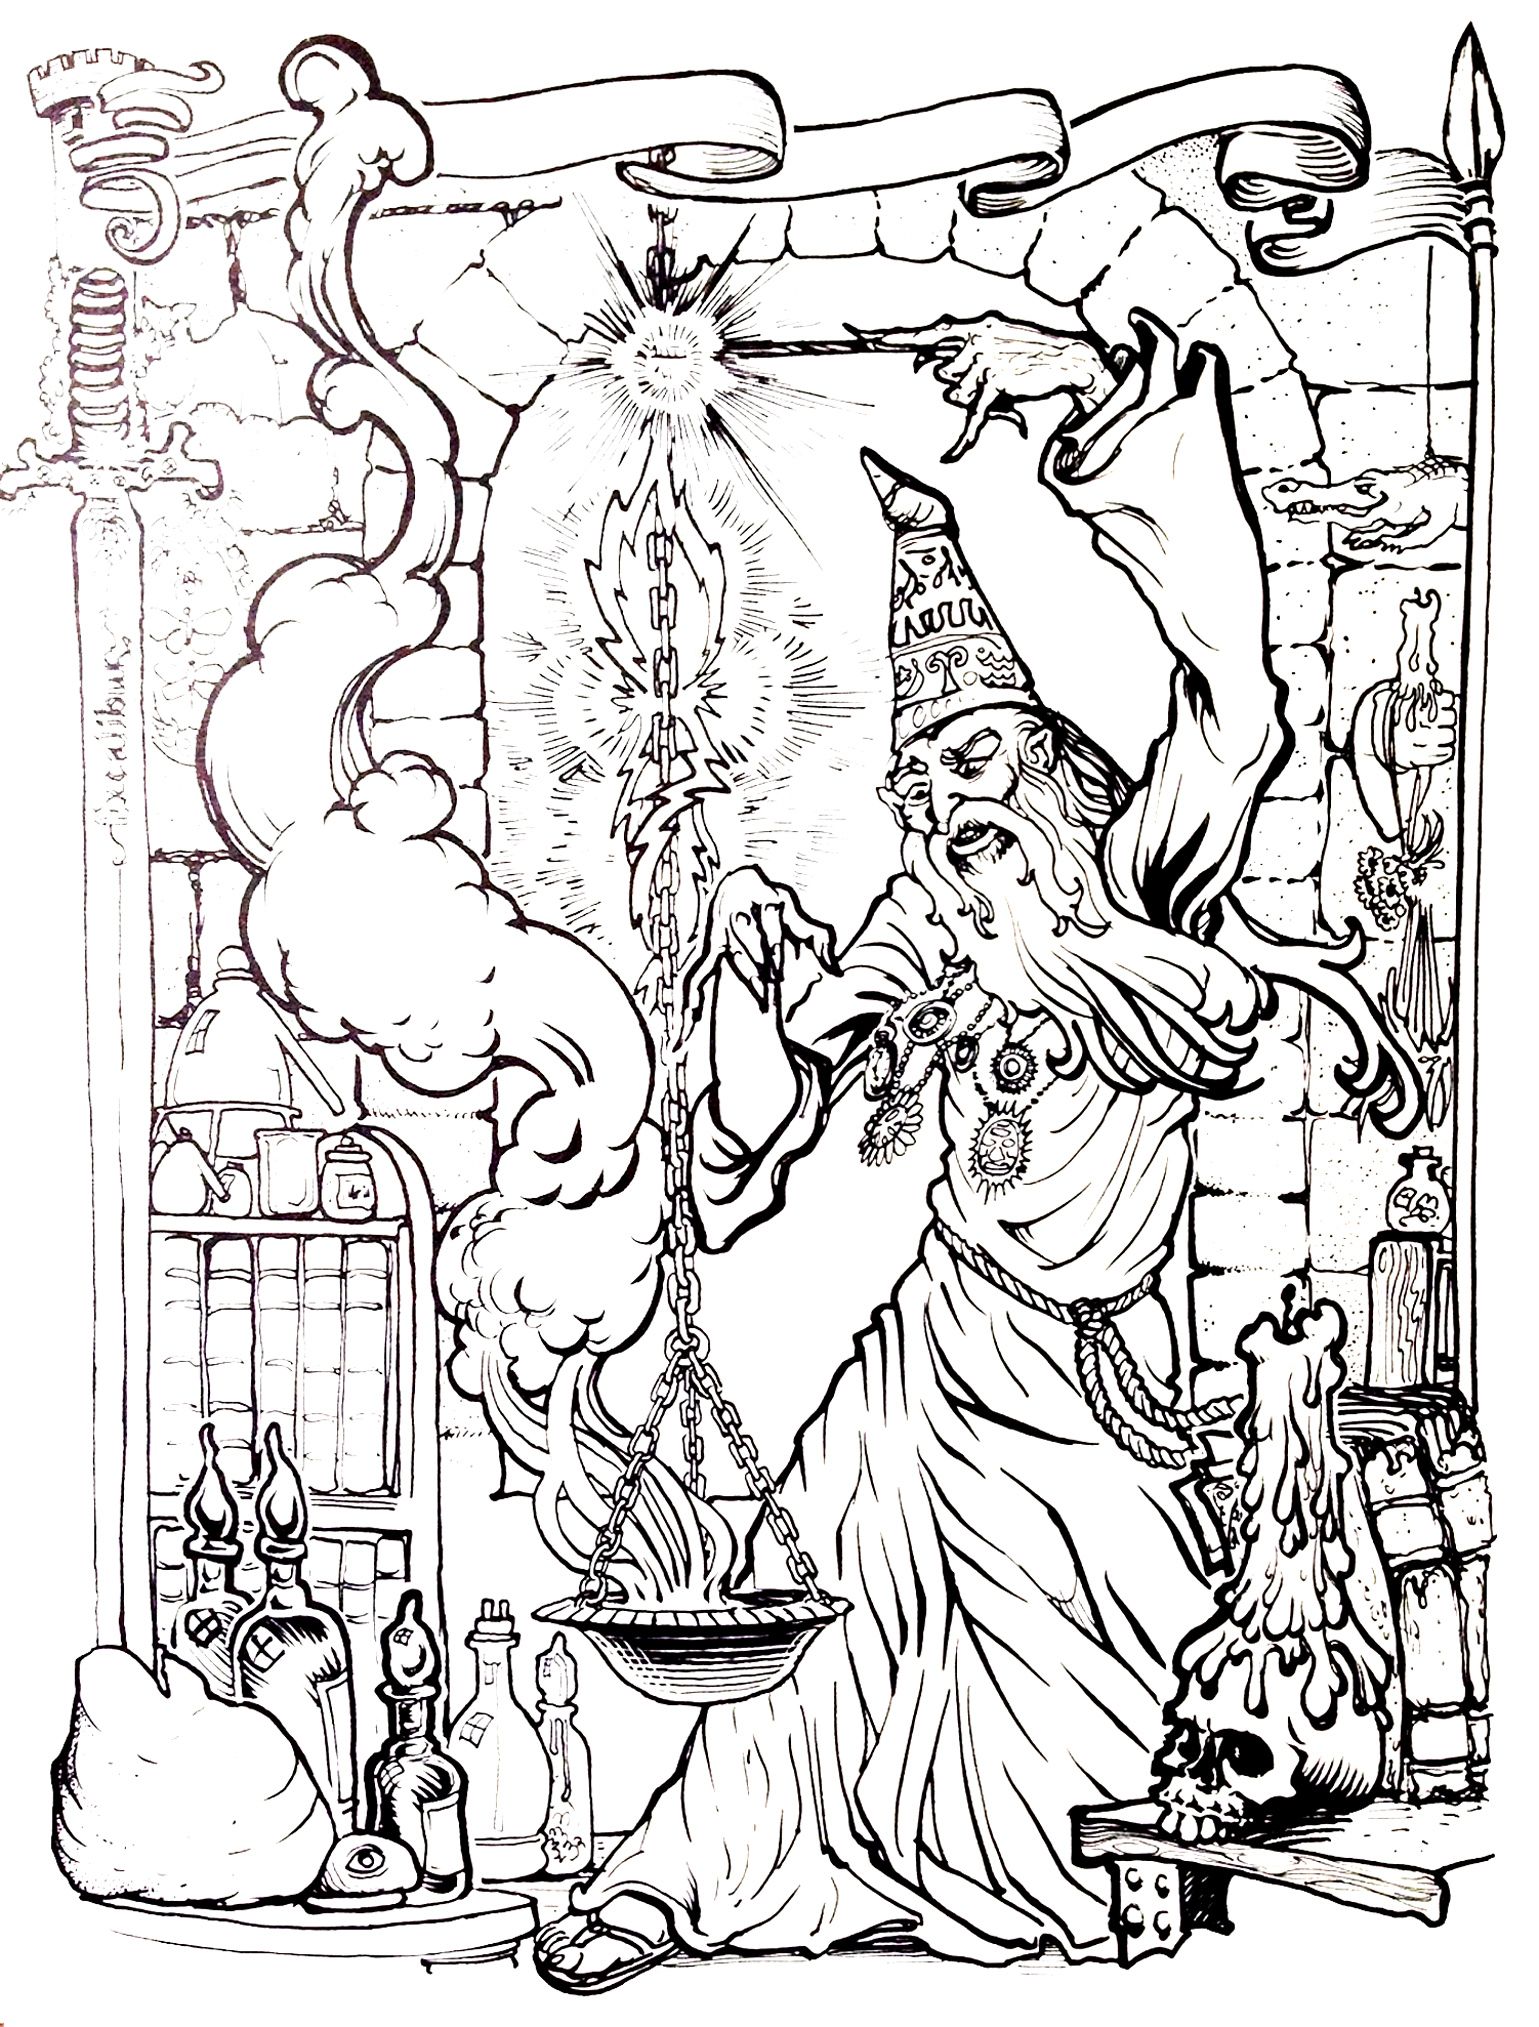 Merlin Coloring Pages at GetColorings.com | Free printable colorings